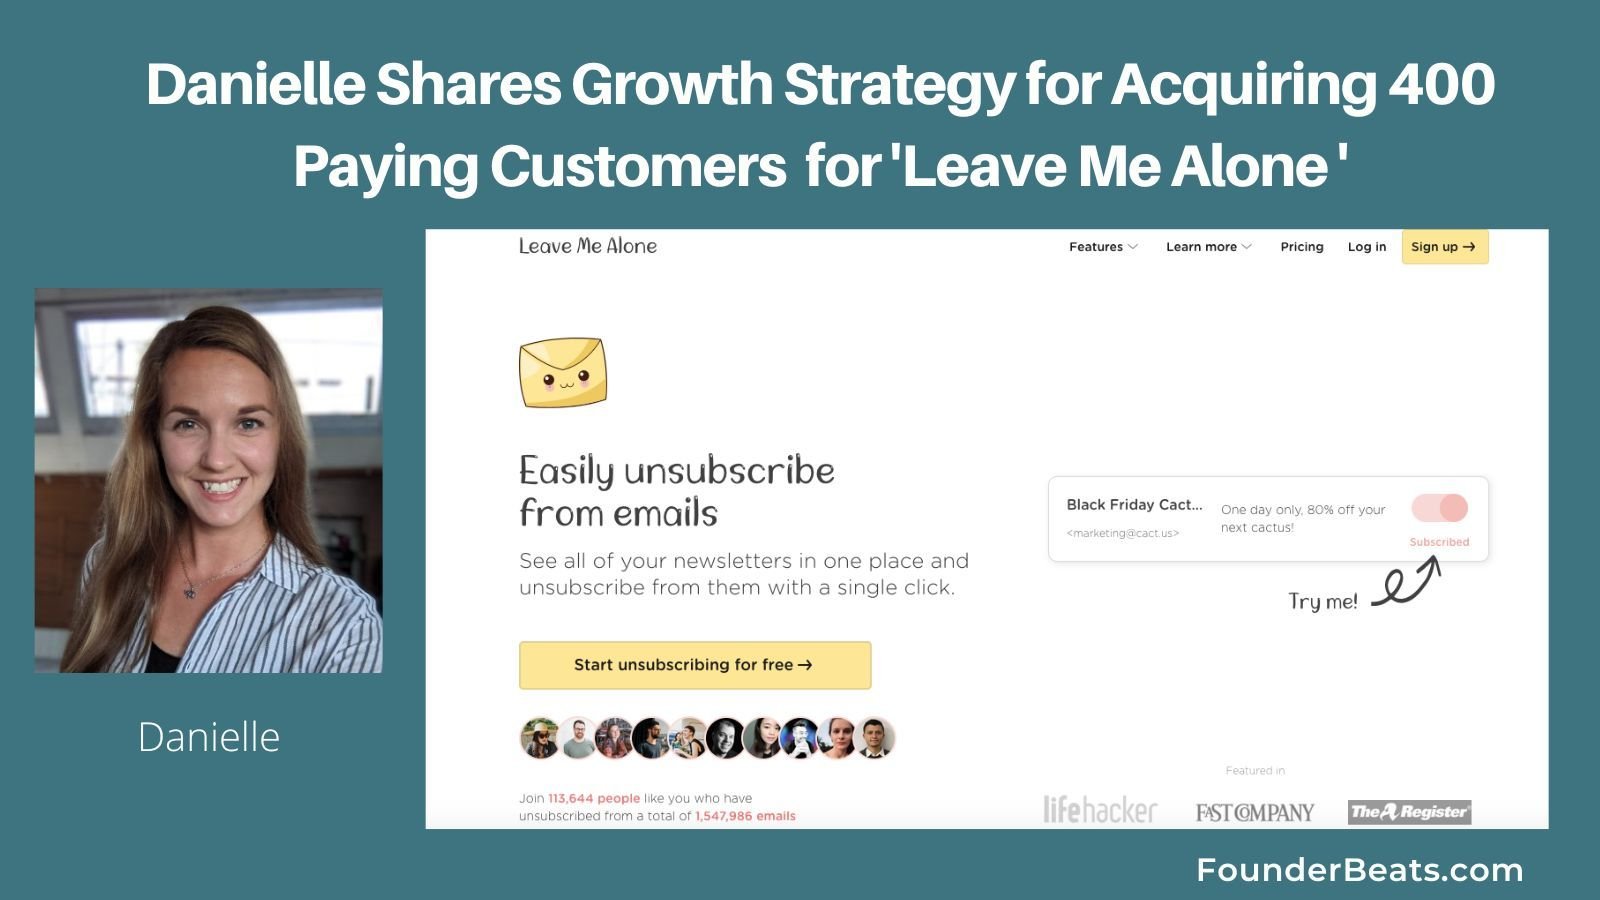 Danielle Shares Growth Strategy for Acquiring 400 Customers for ‘Leave Me Alone’